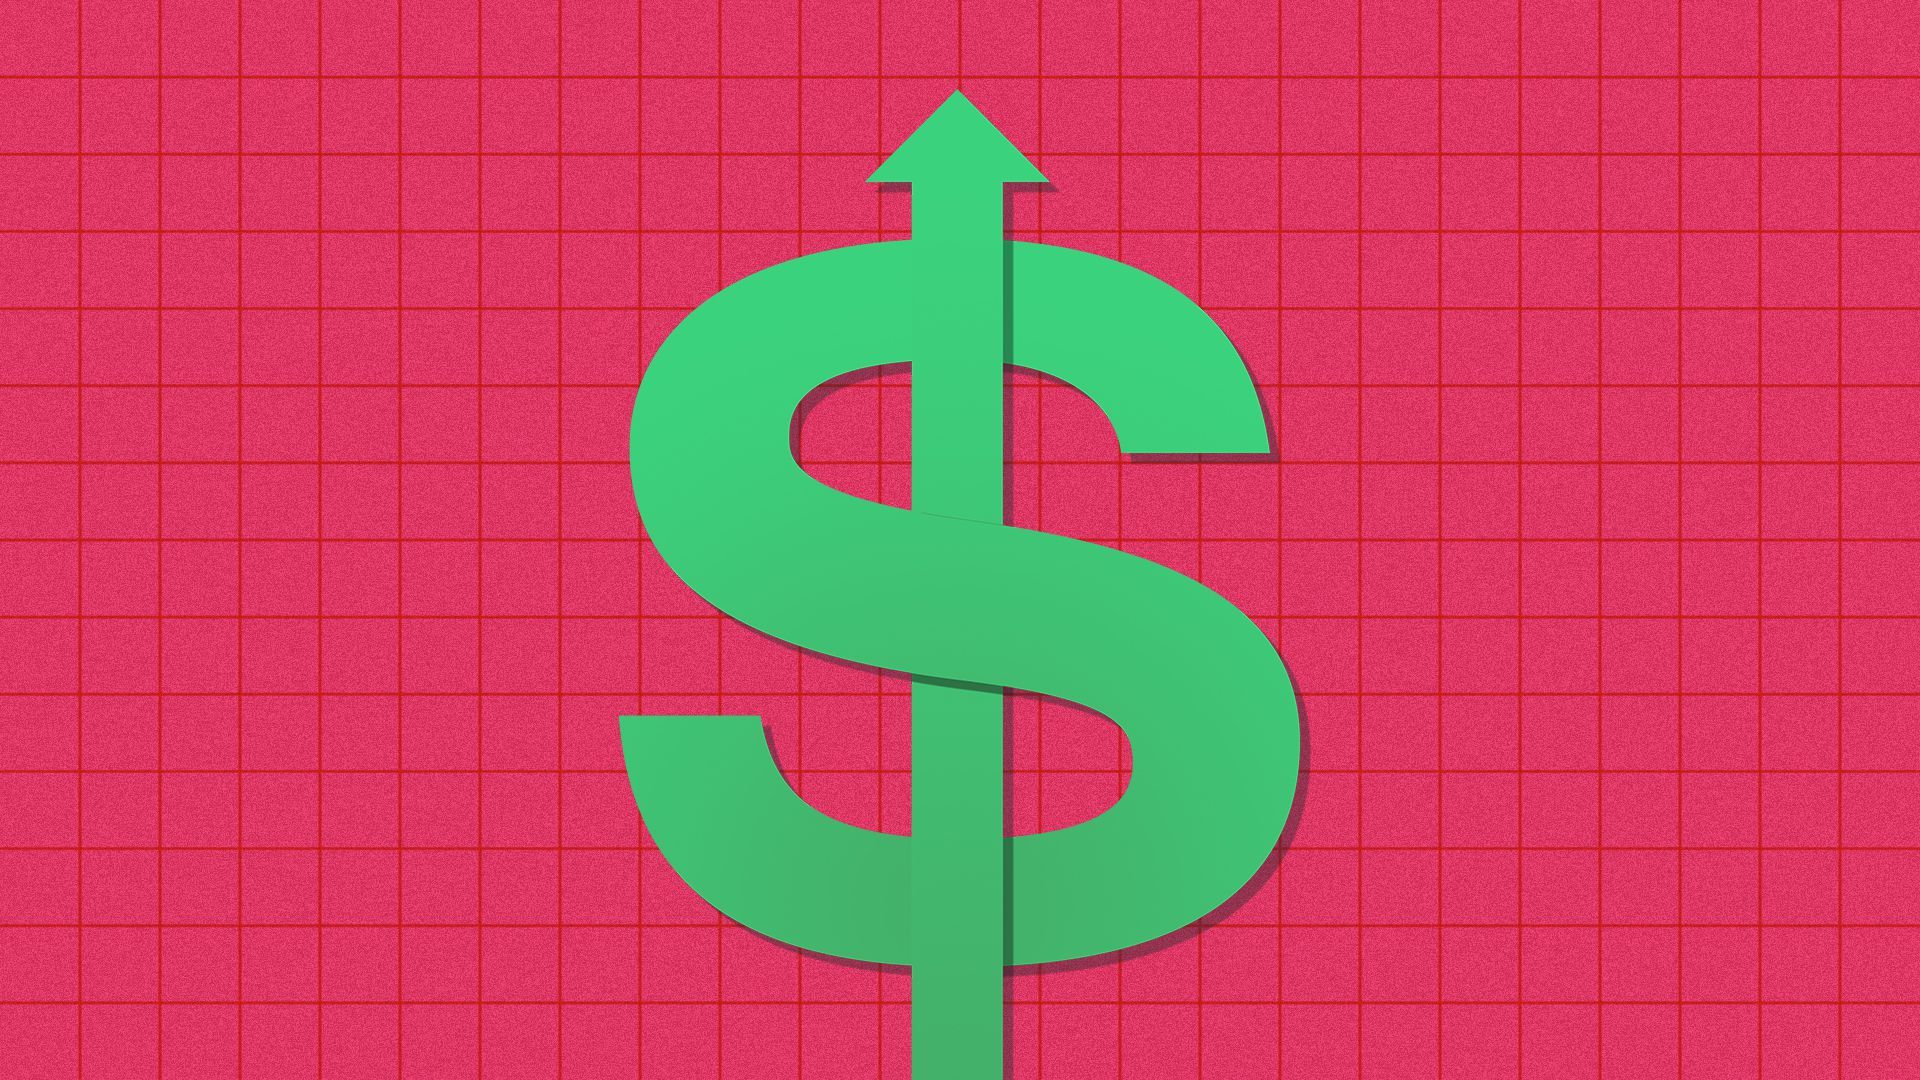 Illustration of a dollar sign against a backdrop of graph paper.